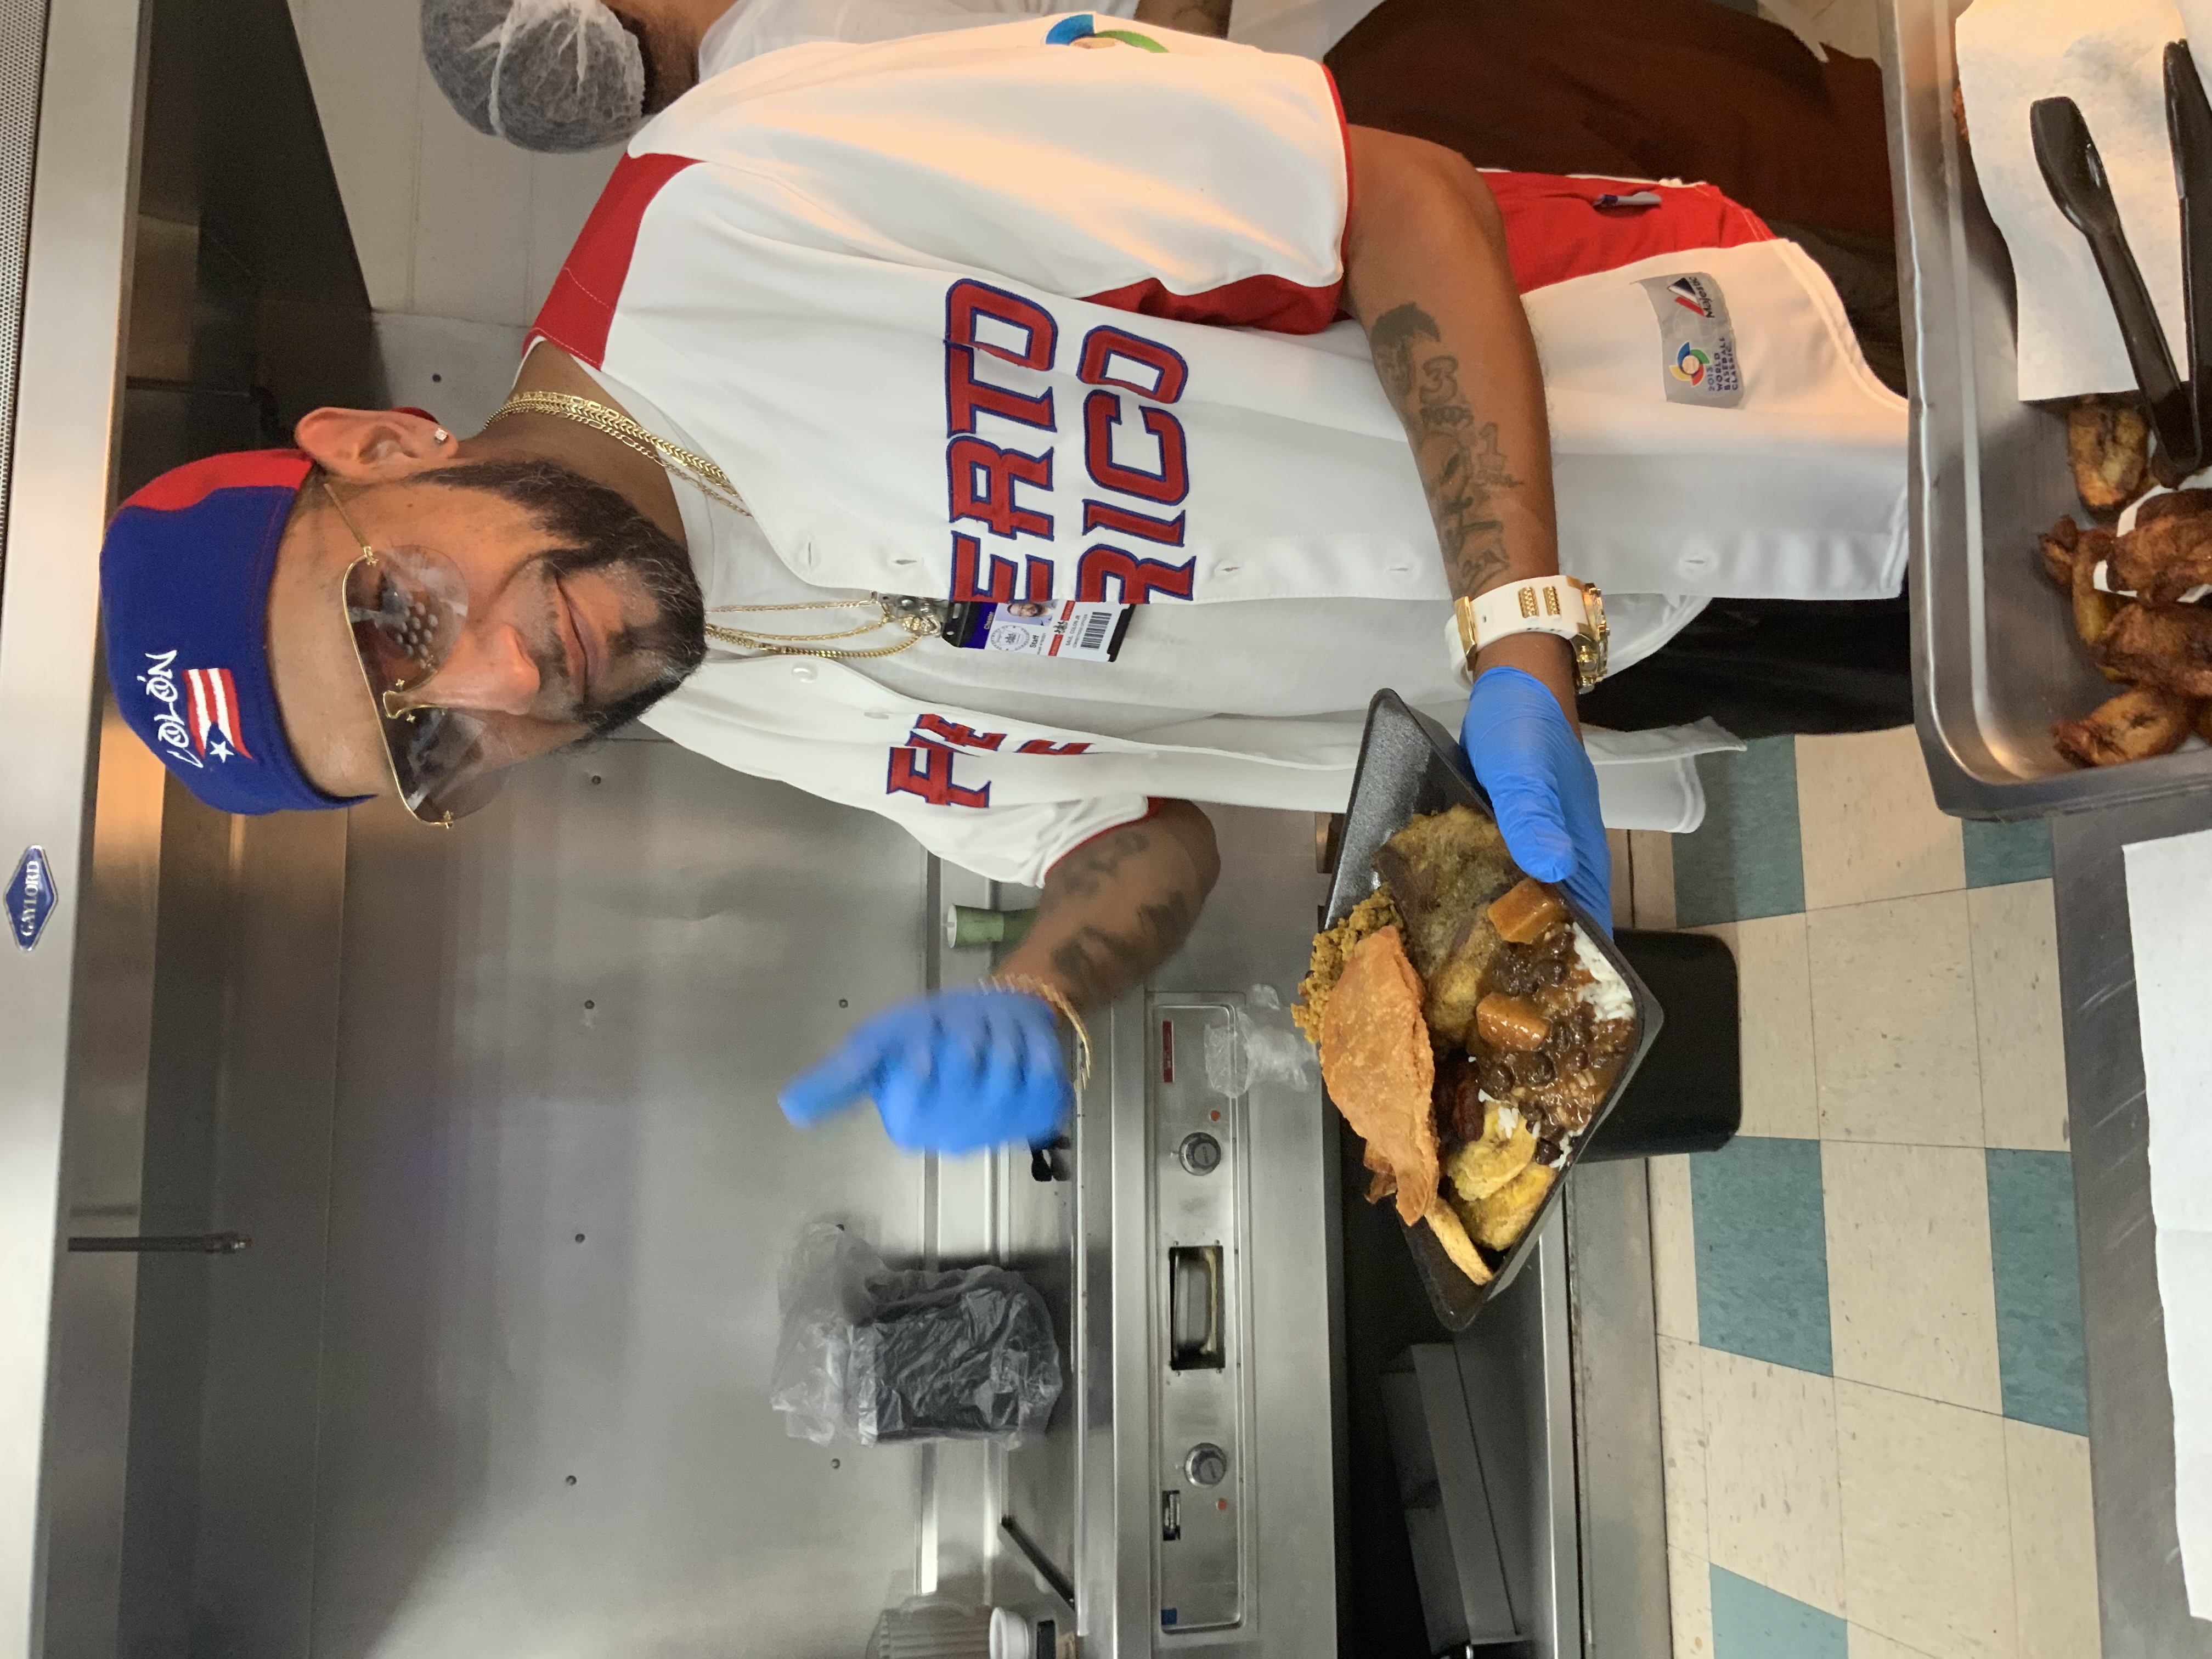 An SCI Chester employee holding a traditional Hispanic dish